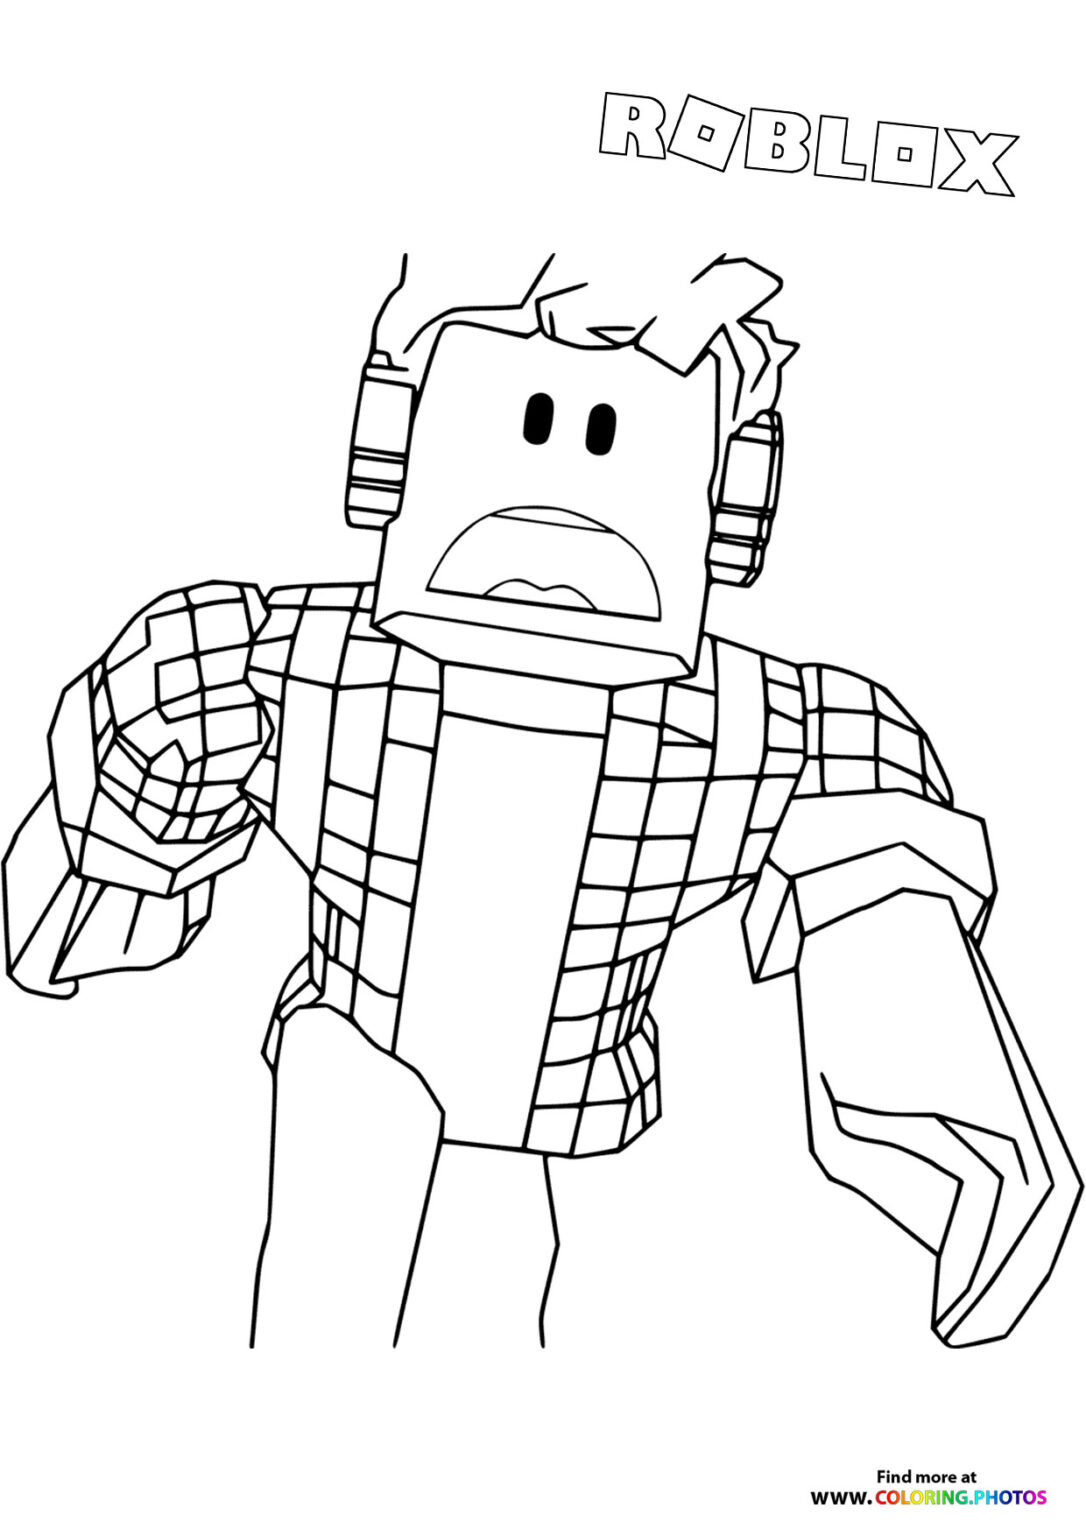 Coloring Pages Of Roblox Coloring Pages